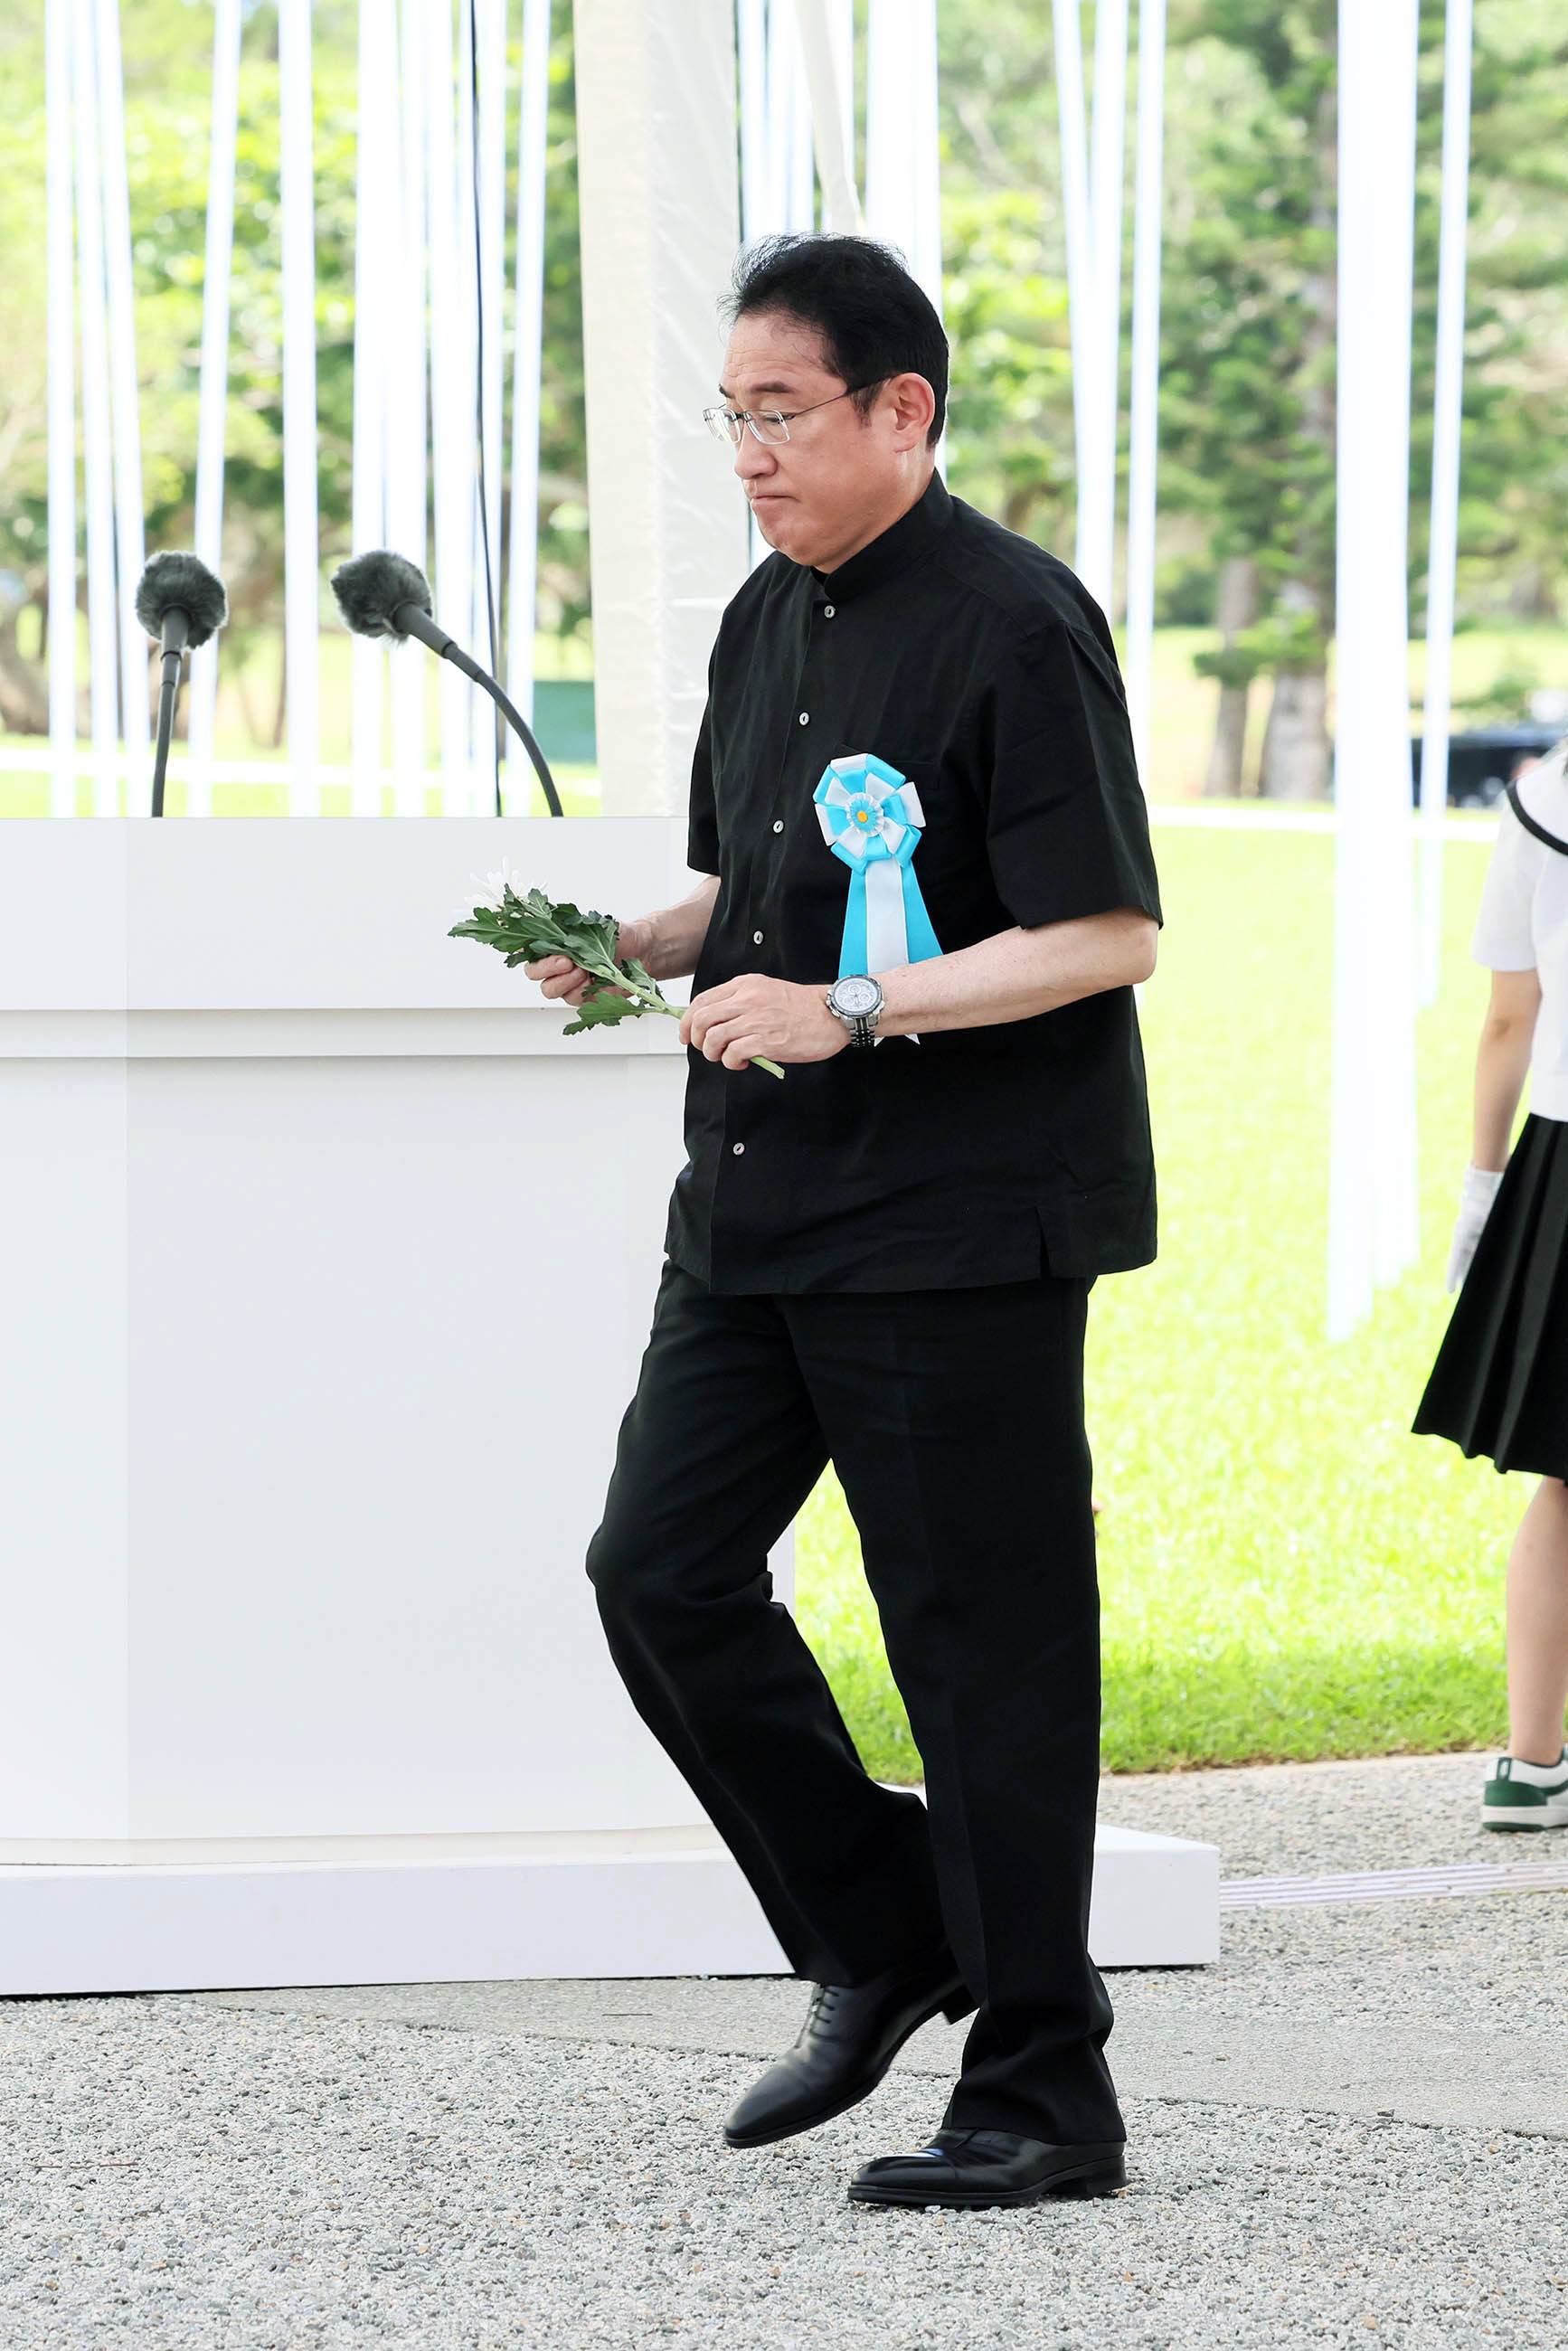 Photograph of the Prime Minister offering a flower at the Memorial Ceremony to Commemorate the Fallen on the 79th Anniversary of the End of the Battle of Okinawa (1)